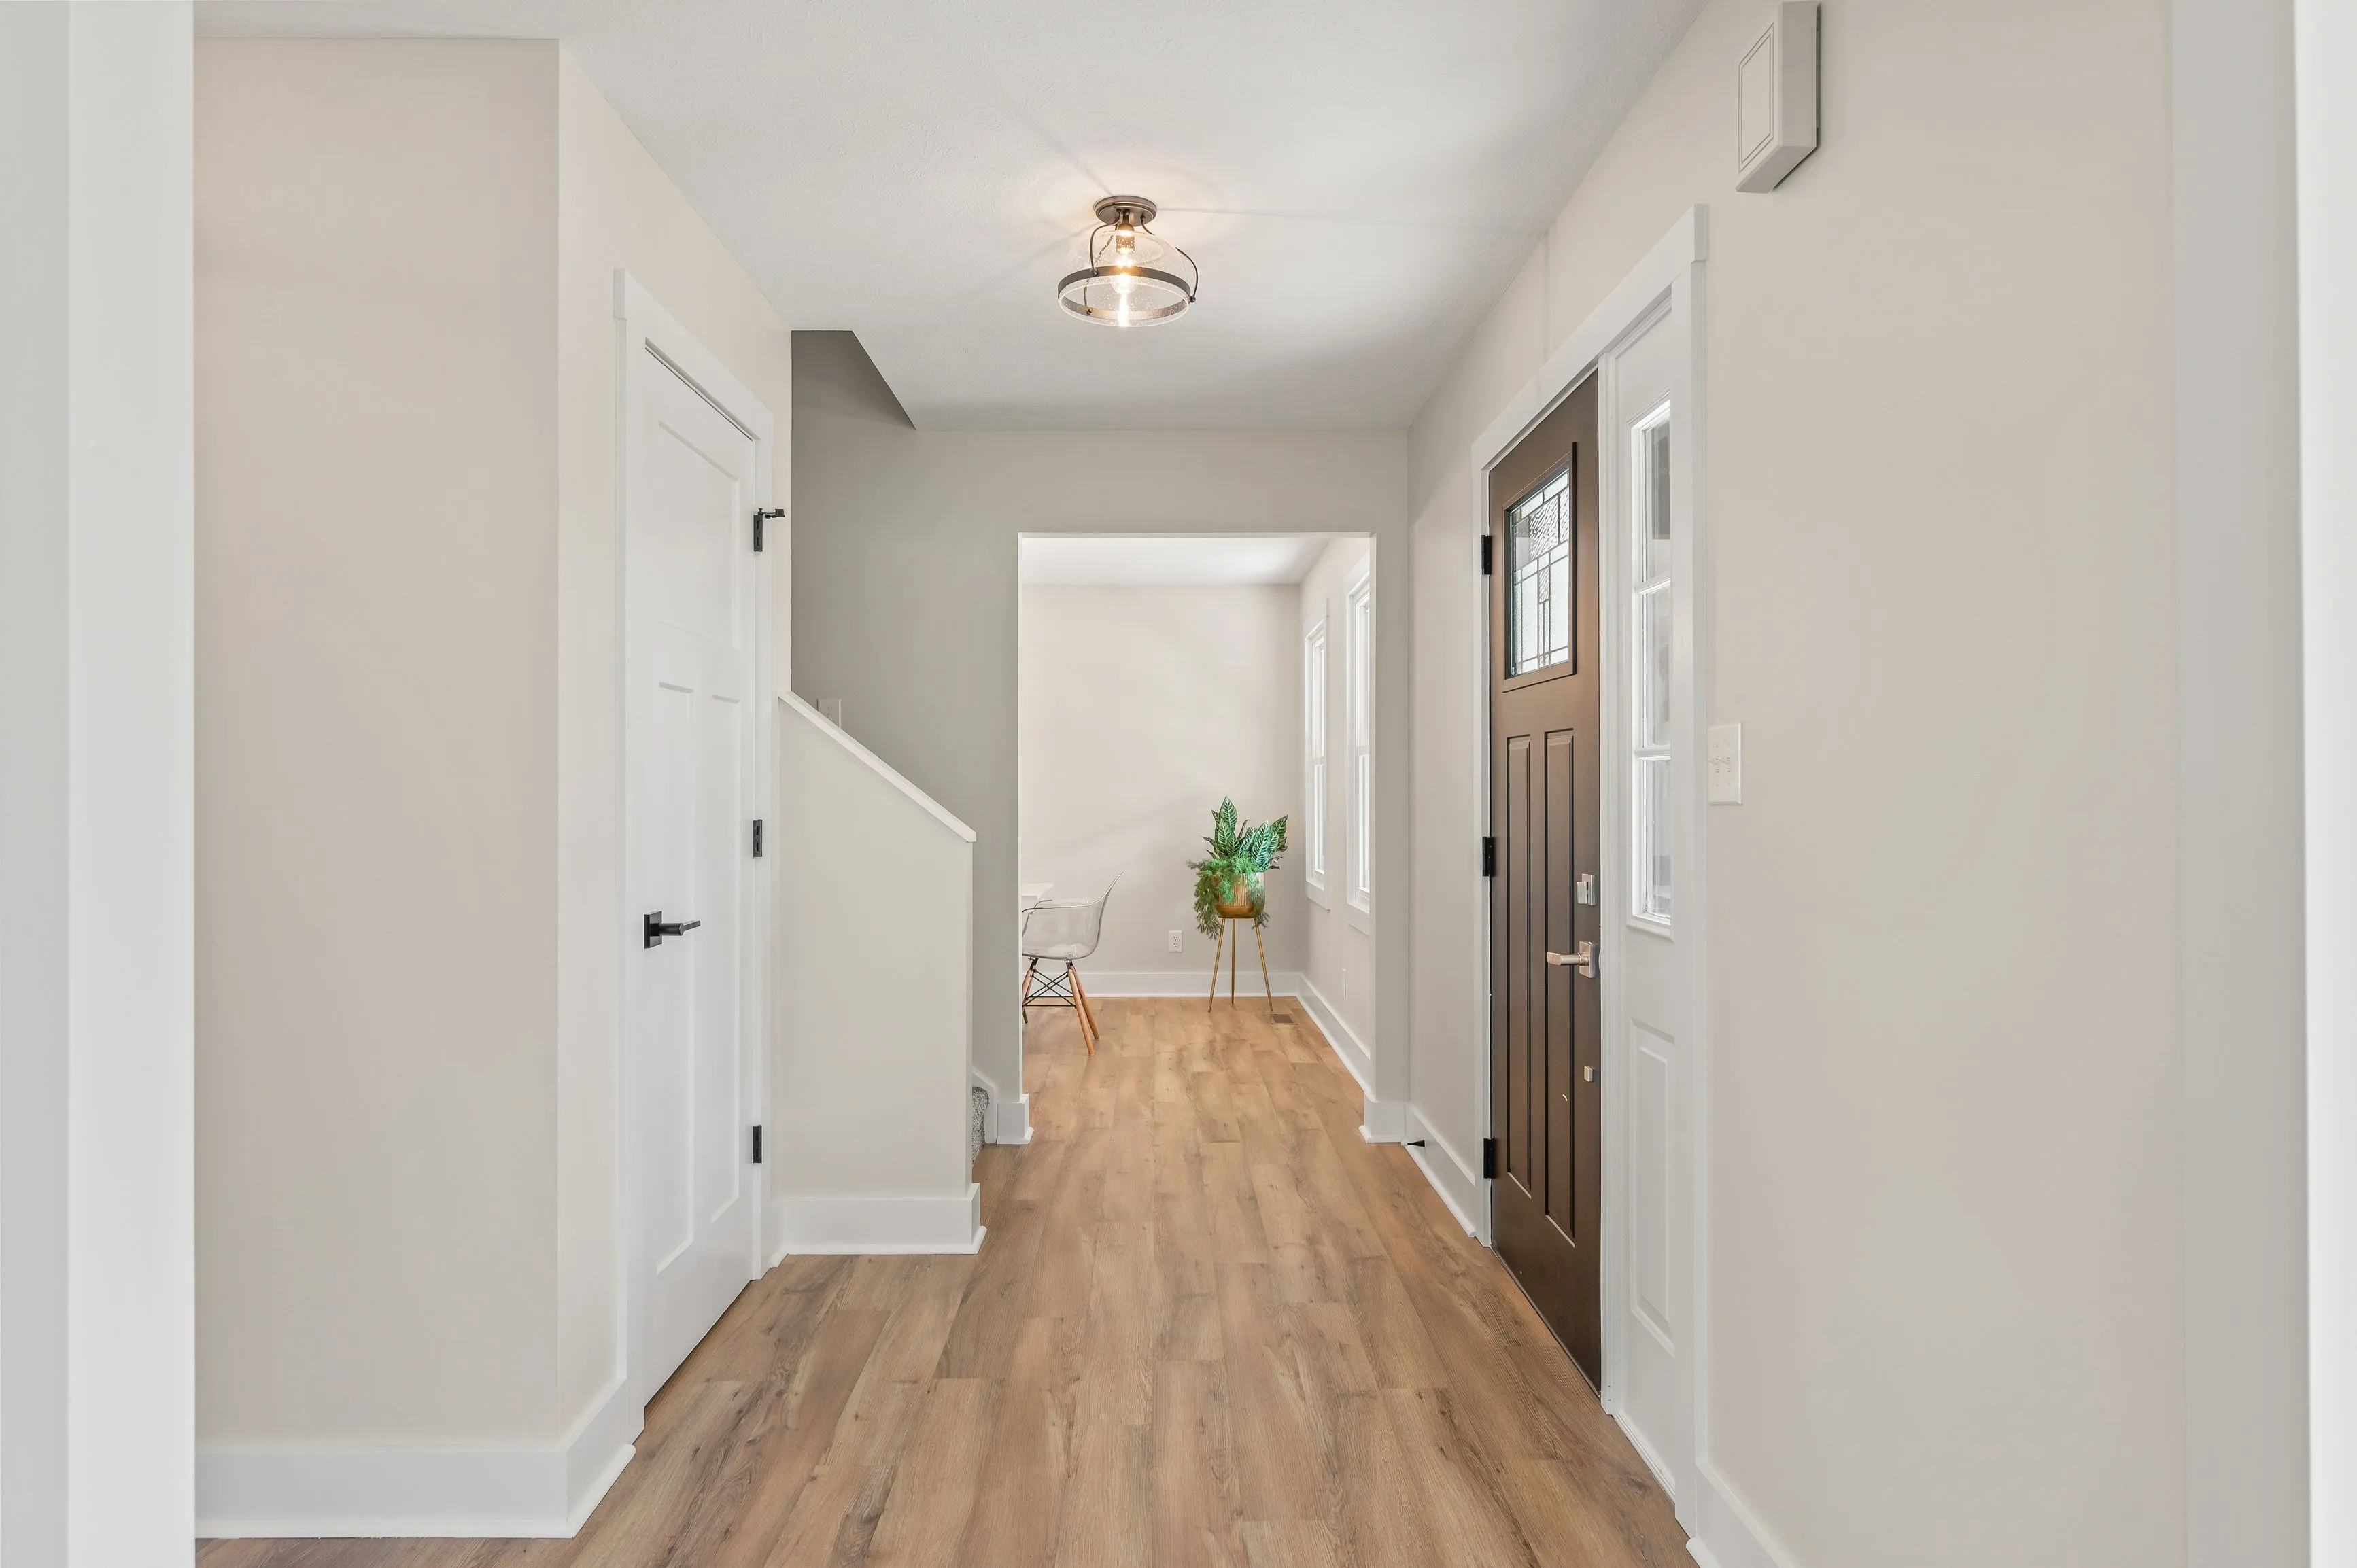 Bright and modern hallway interior with wooden flooring, white walls, and a front door with windows.